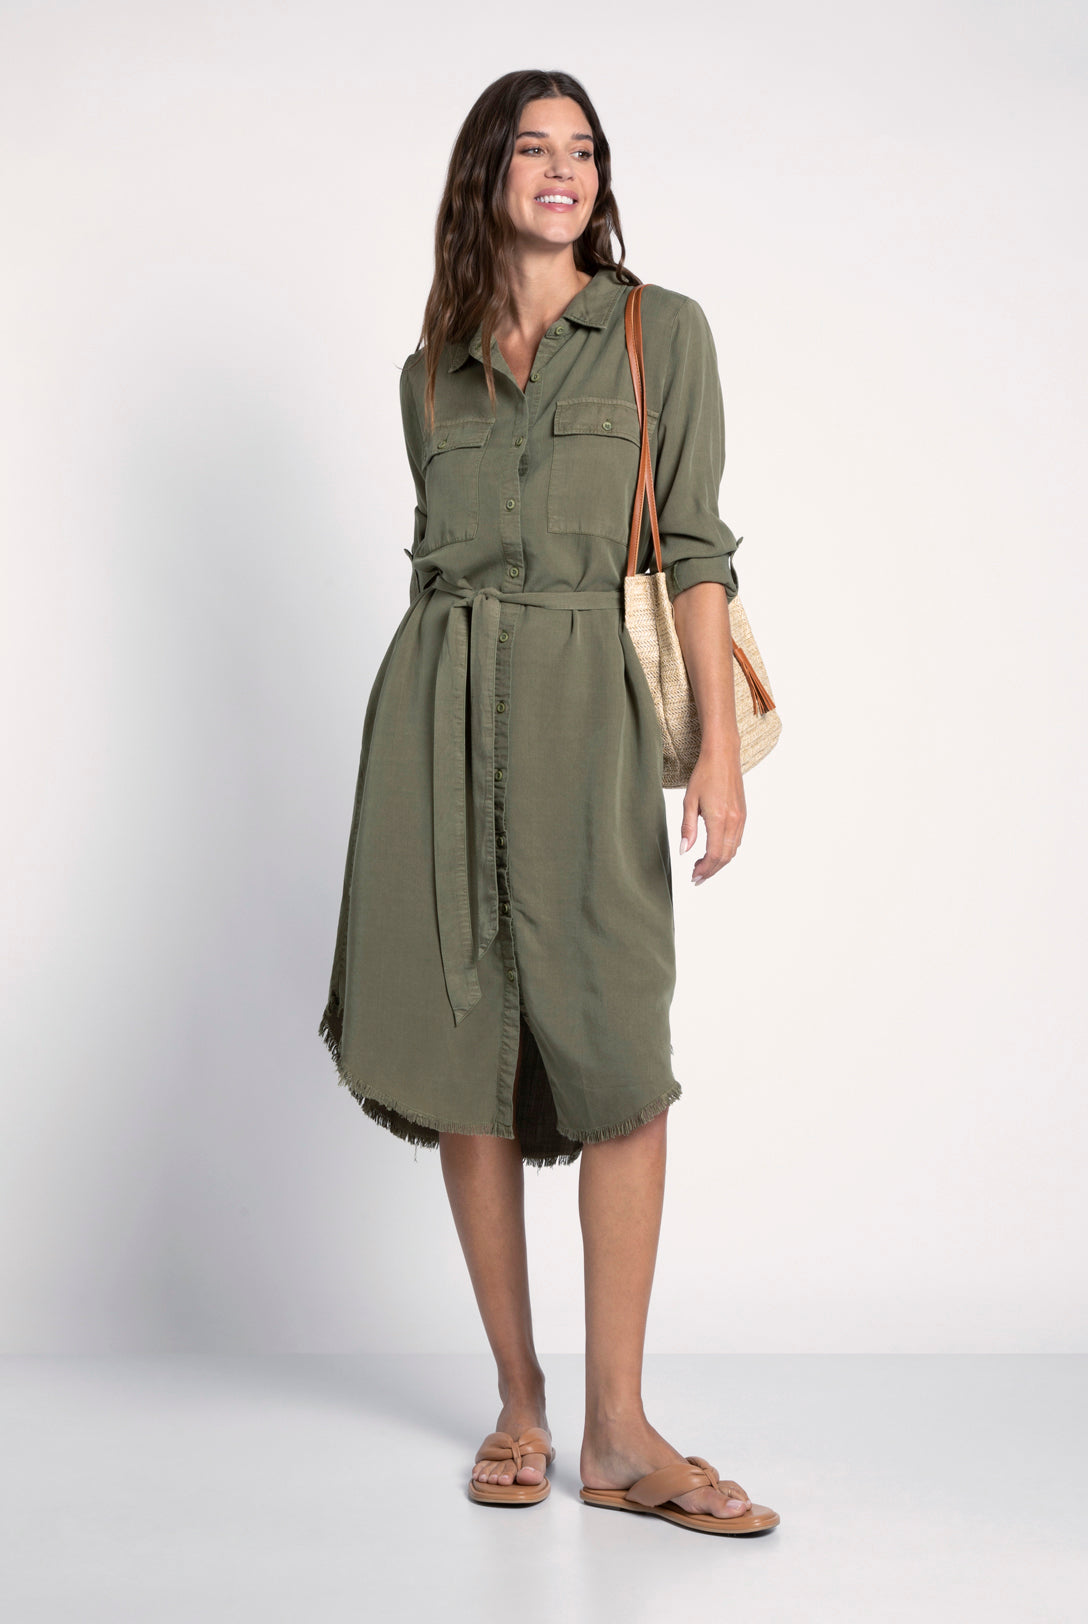 Long Sleeve Olive Dress Apex Ethical Boutique